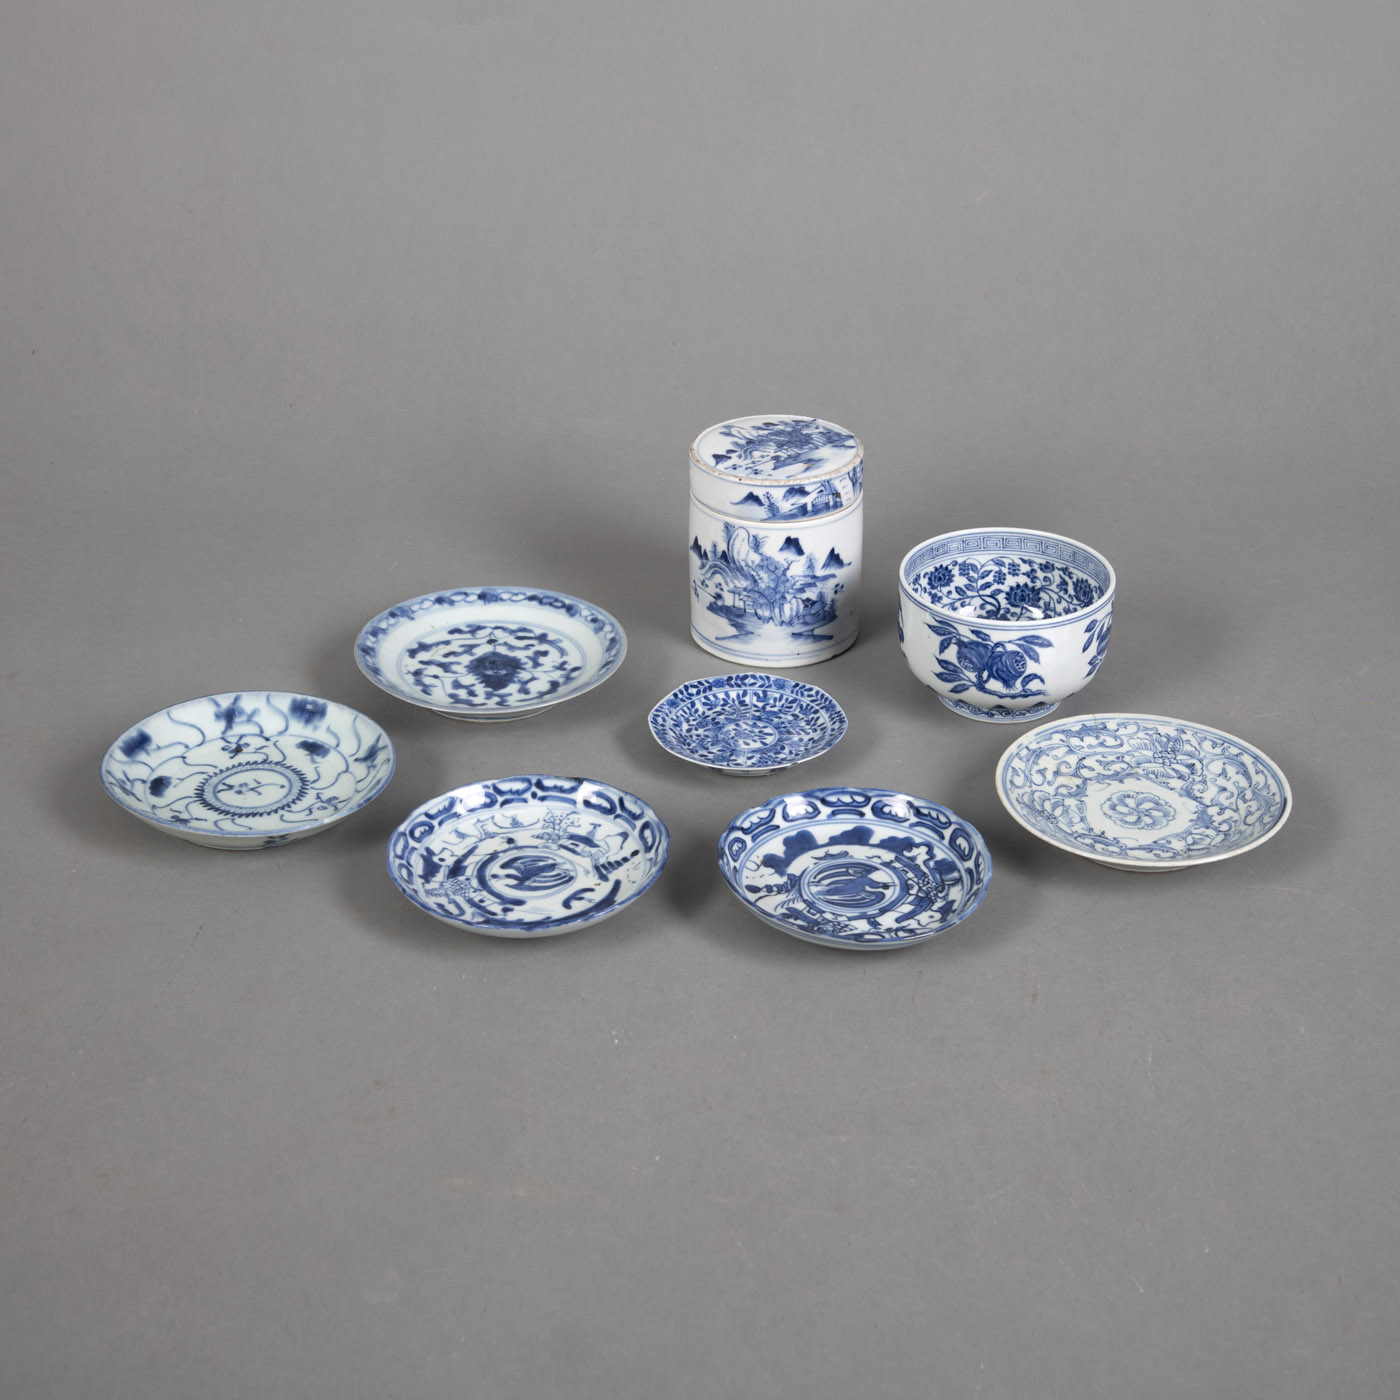 <b>LOT OF UNDERGLAZE BLUE PORCELAIN PIECES: A CYLINDRICAL BOX AND COVER, A BOWL AND SIX DISHES</b>